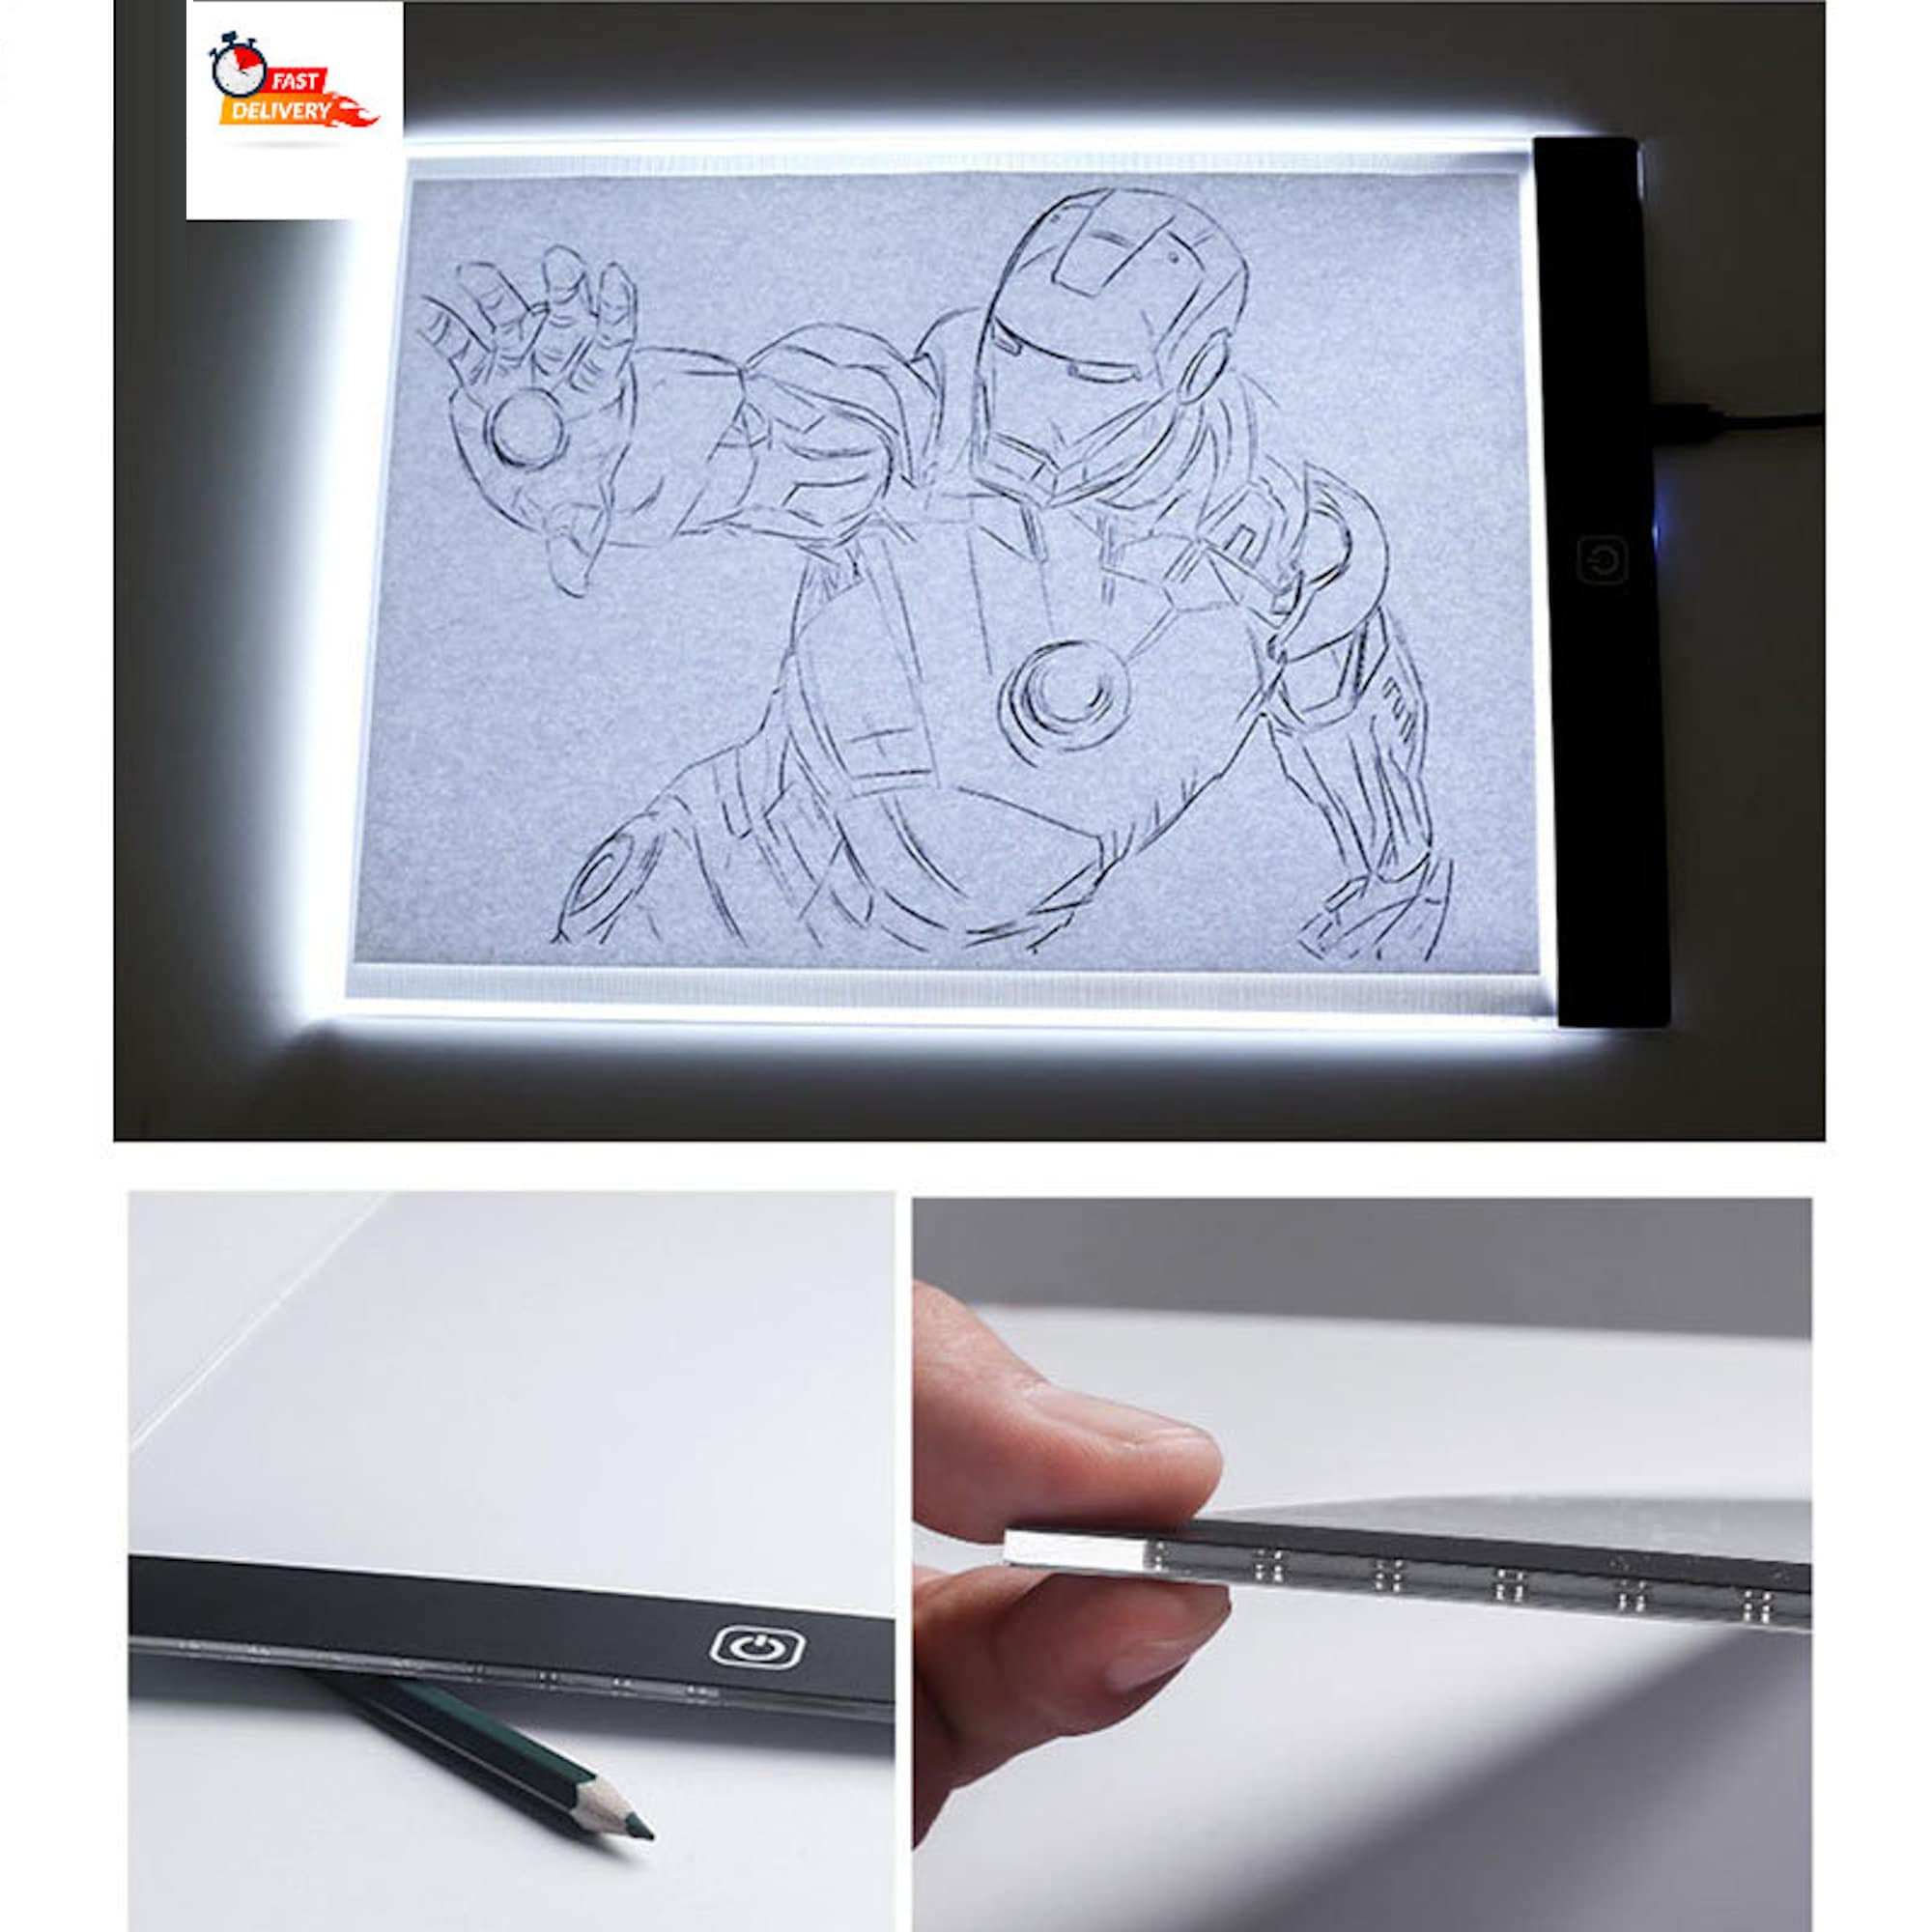 2nd GEN Light pad-A4M A4 Light Box for Tracing lightbox Tracer Light Board for Diamond Painting Art Ultra Thin Light Pad for Drawing Sketching Animation Stencilling with 2 Magnetic Pins 